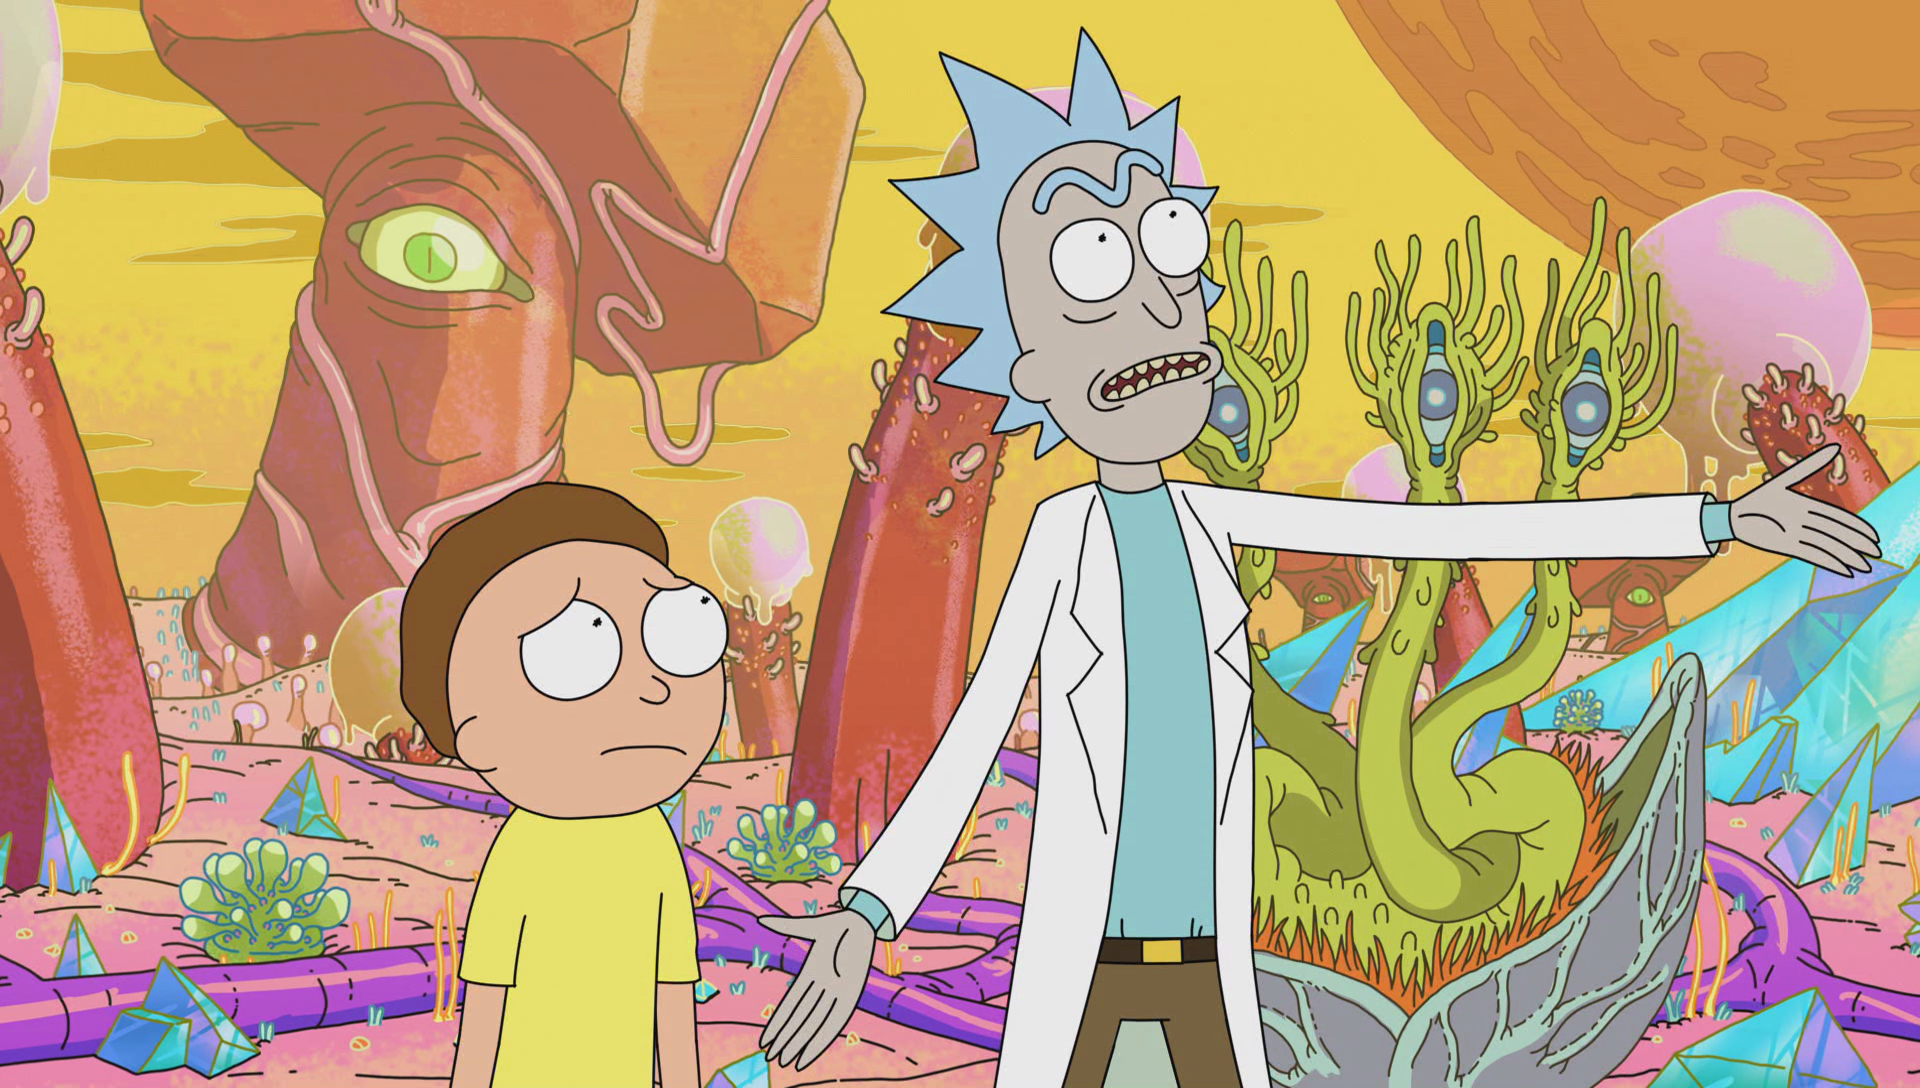 Rick and Morty Season 1, Episode 9 Part 1 - Dailymotion Video